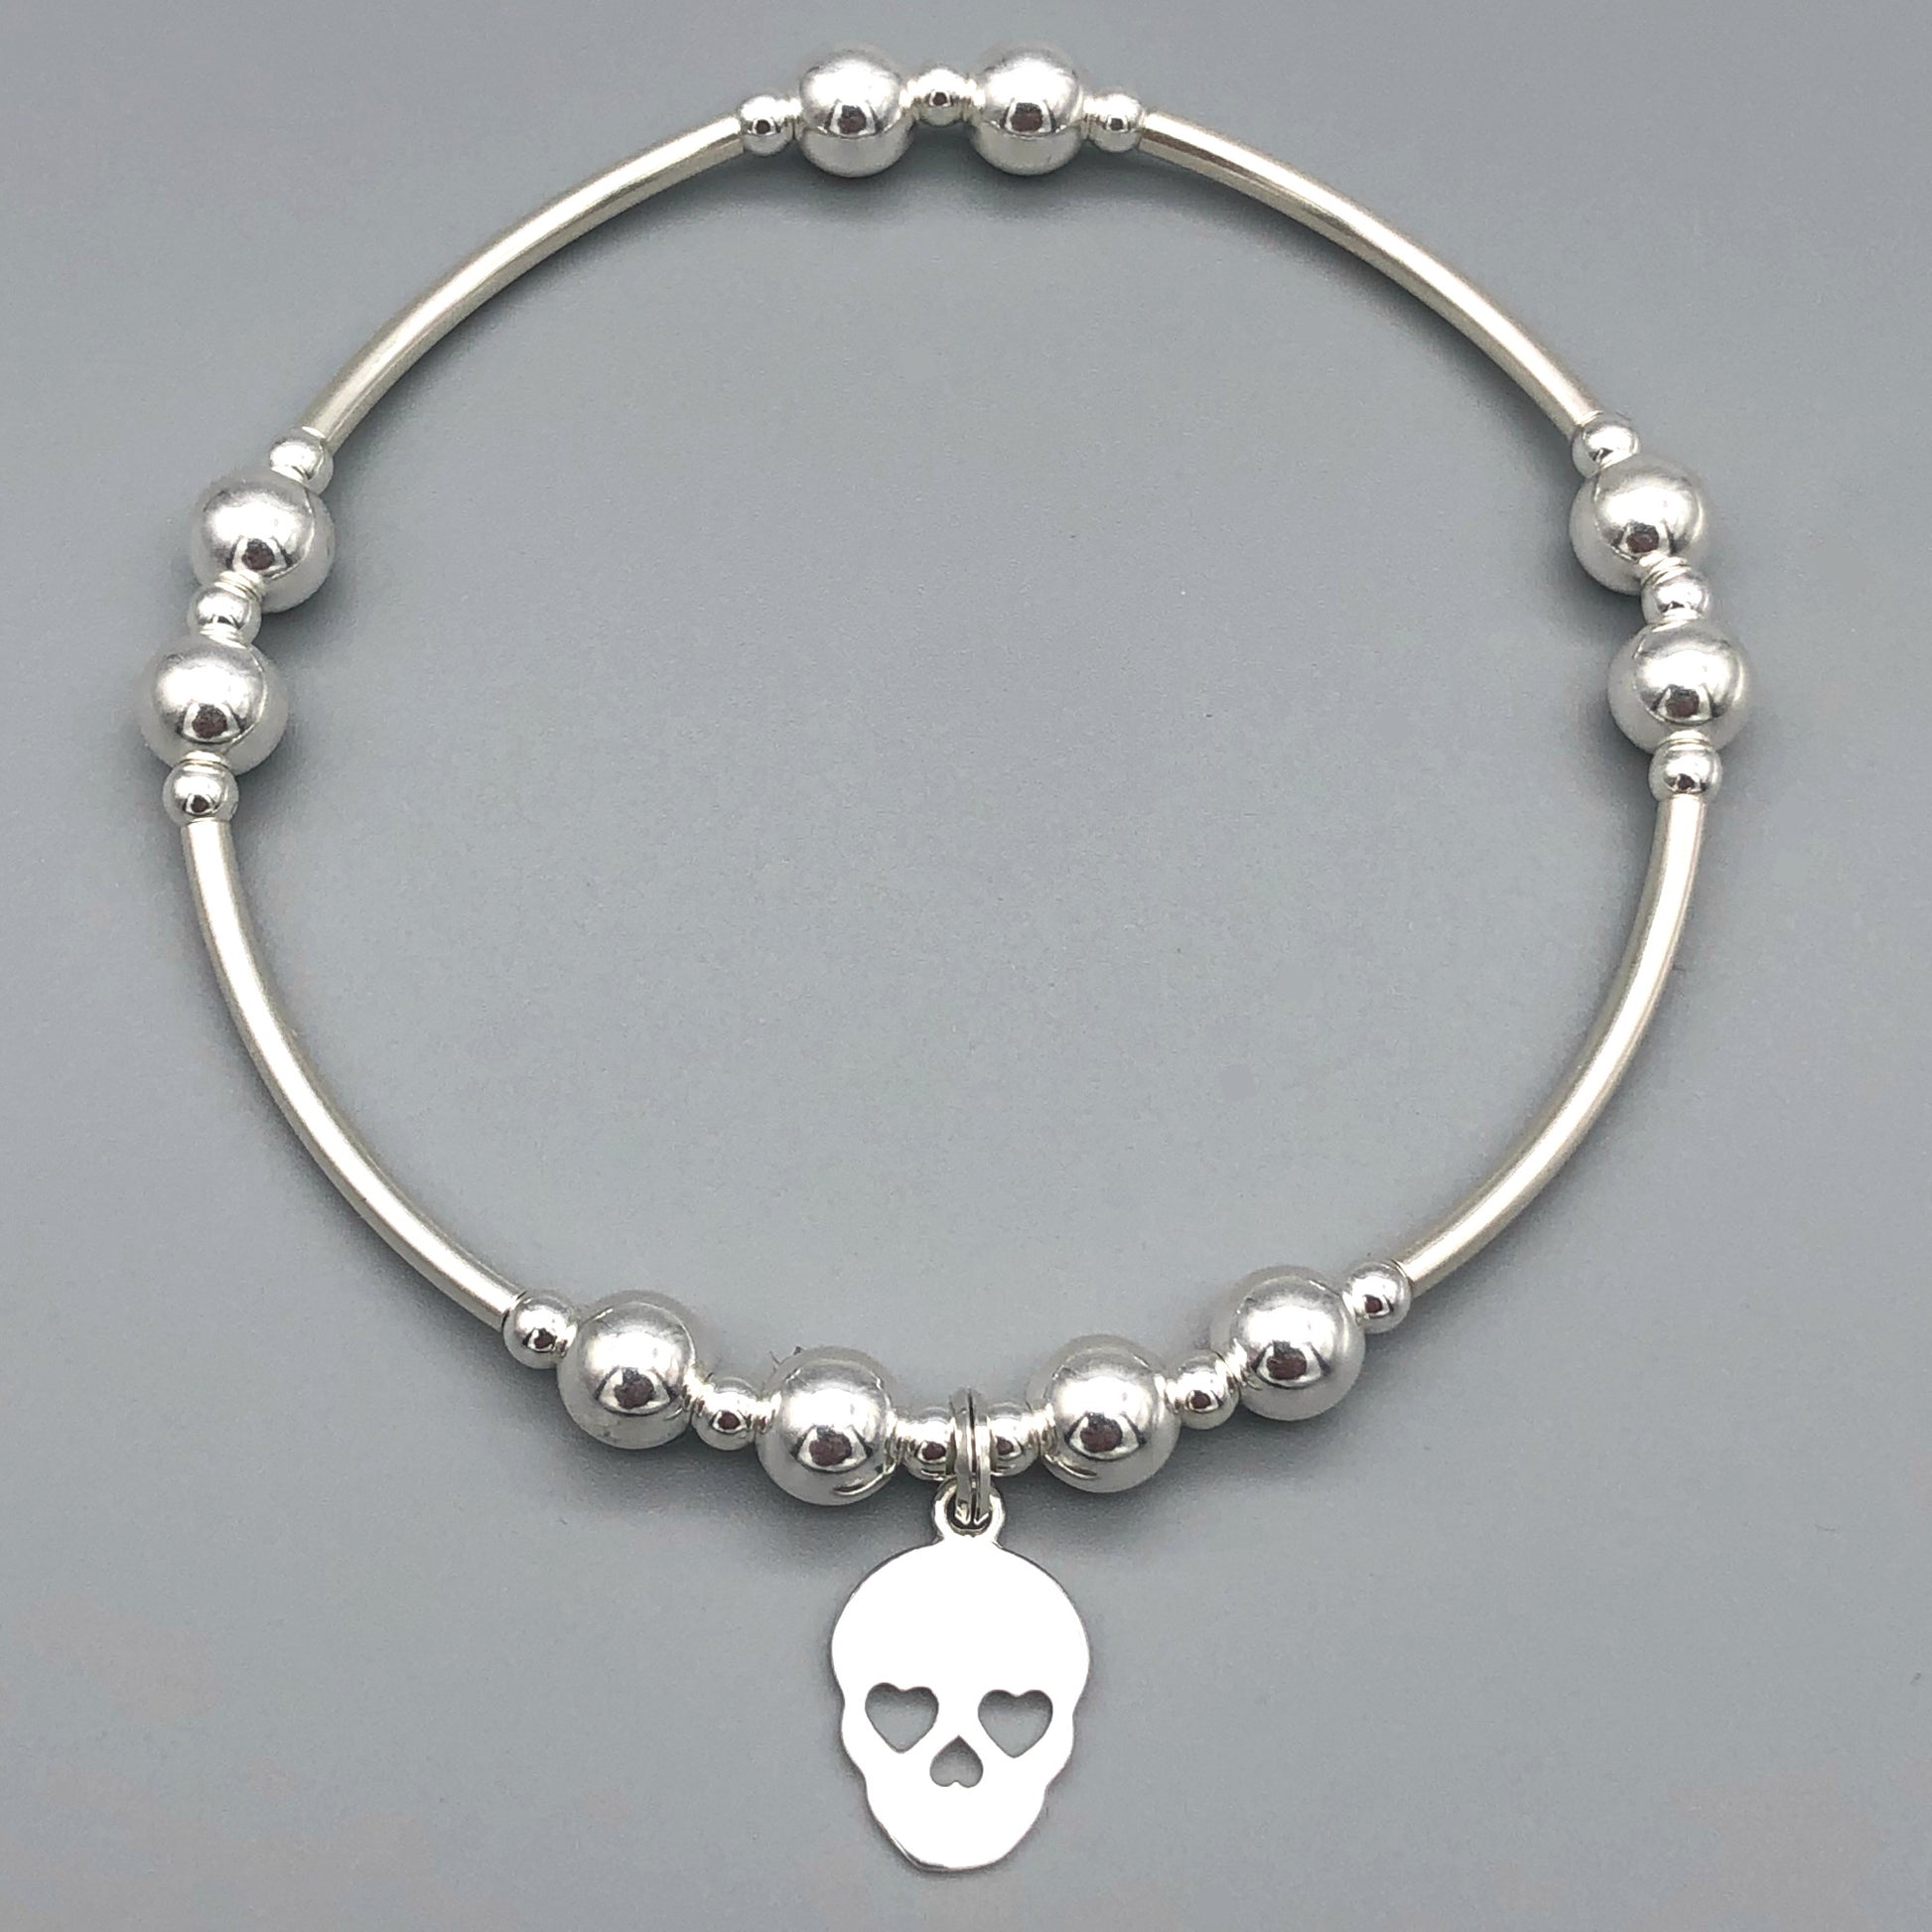 Skull charm sterling silver hand-made women's stacking bracelet by My Silver Wish